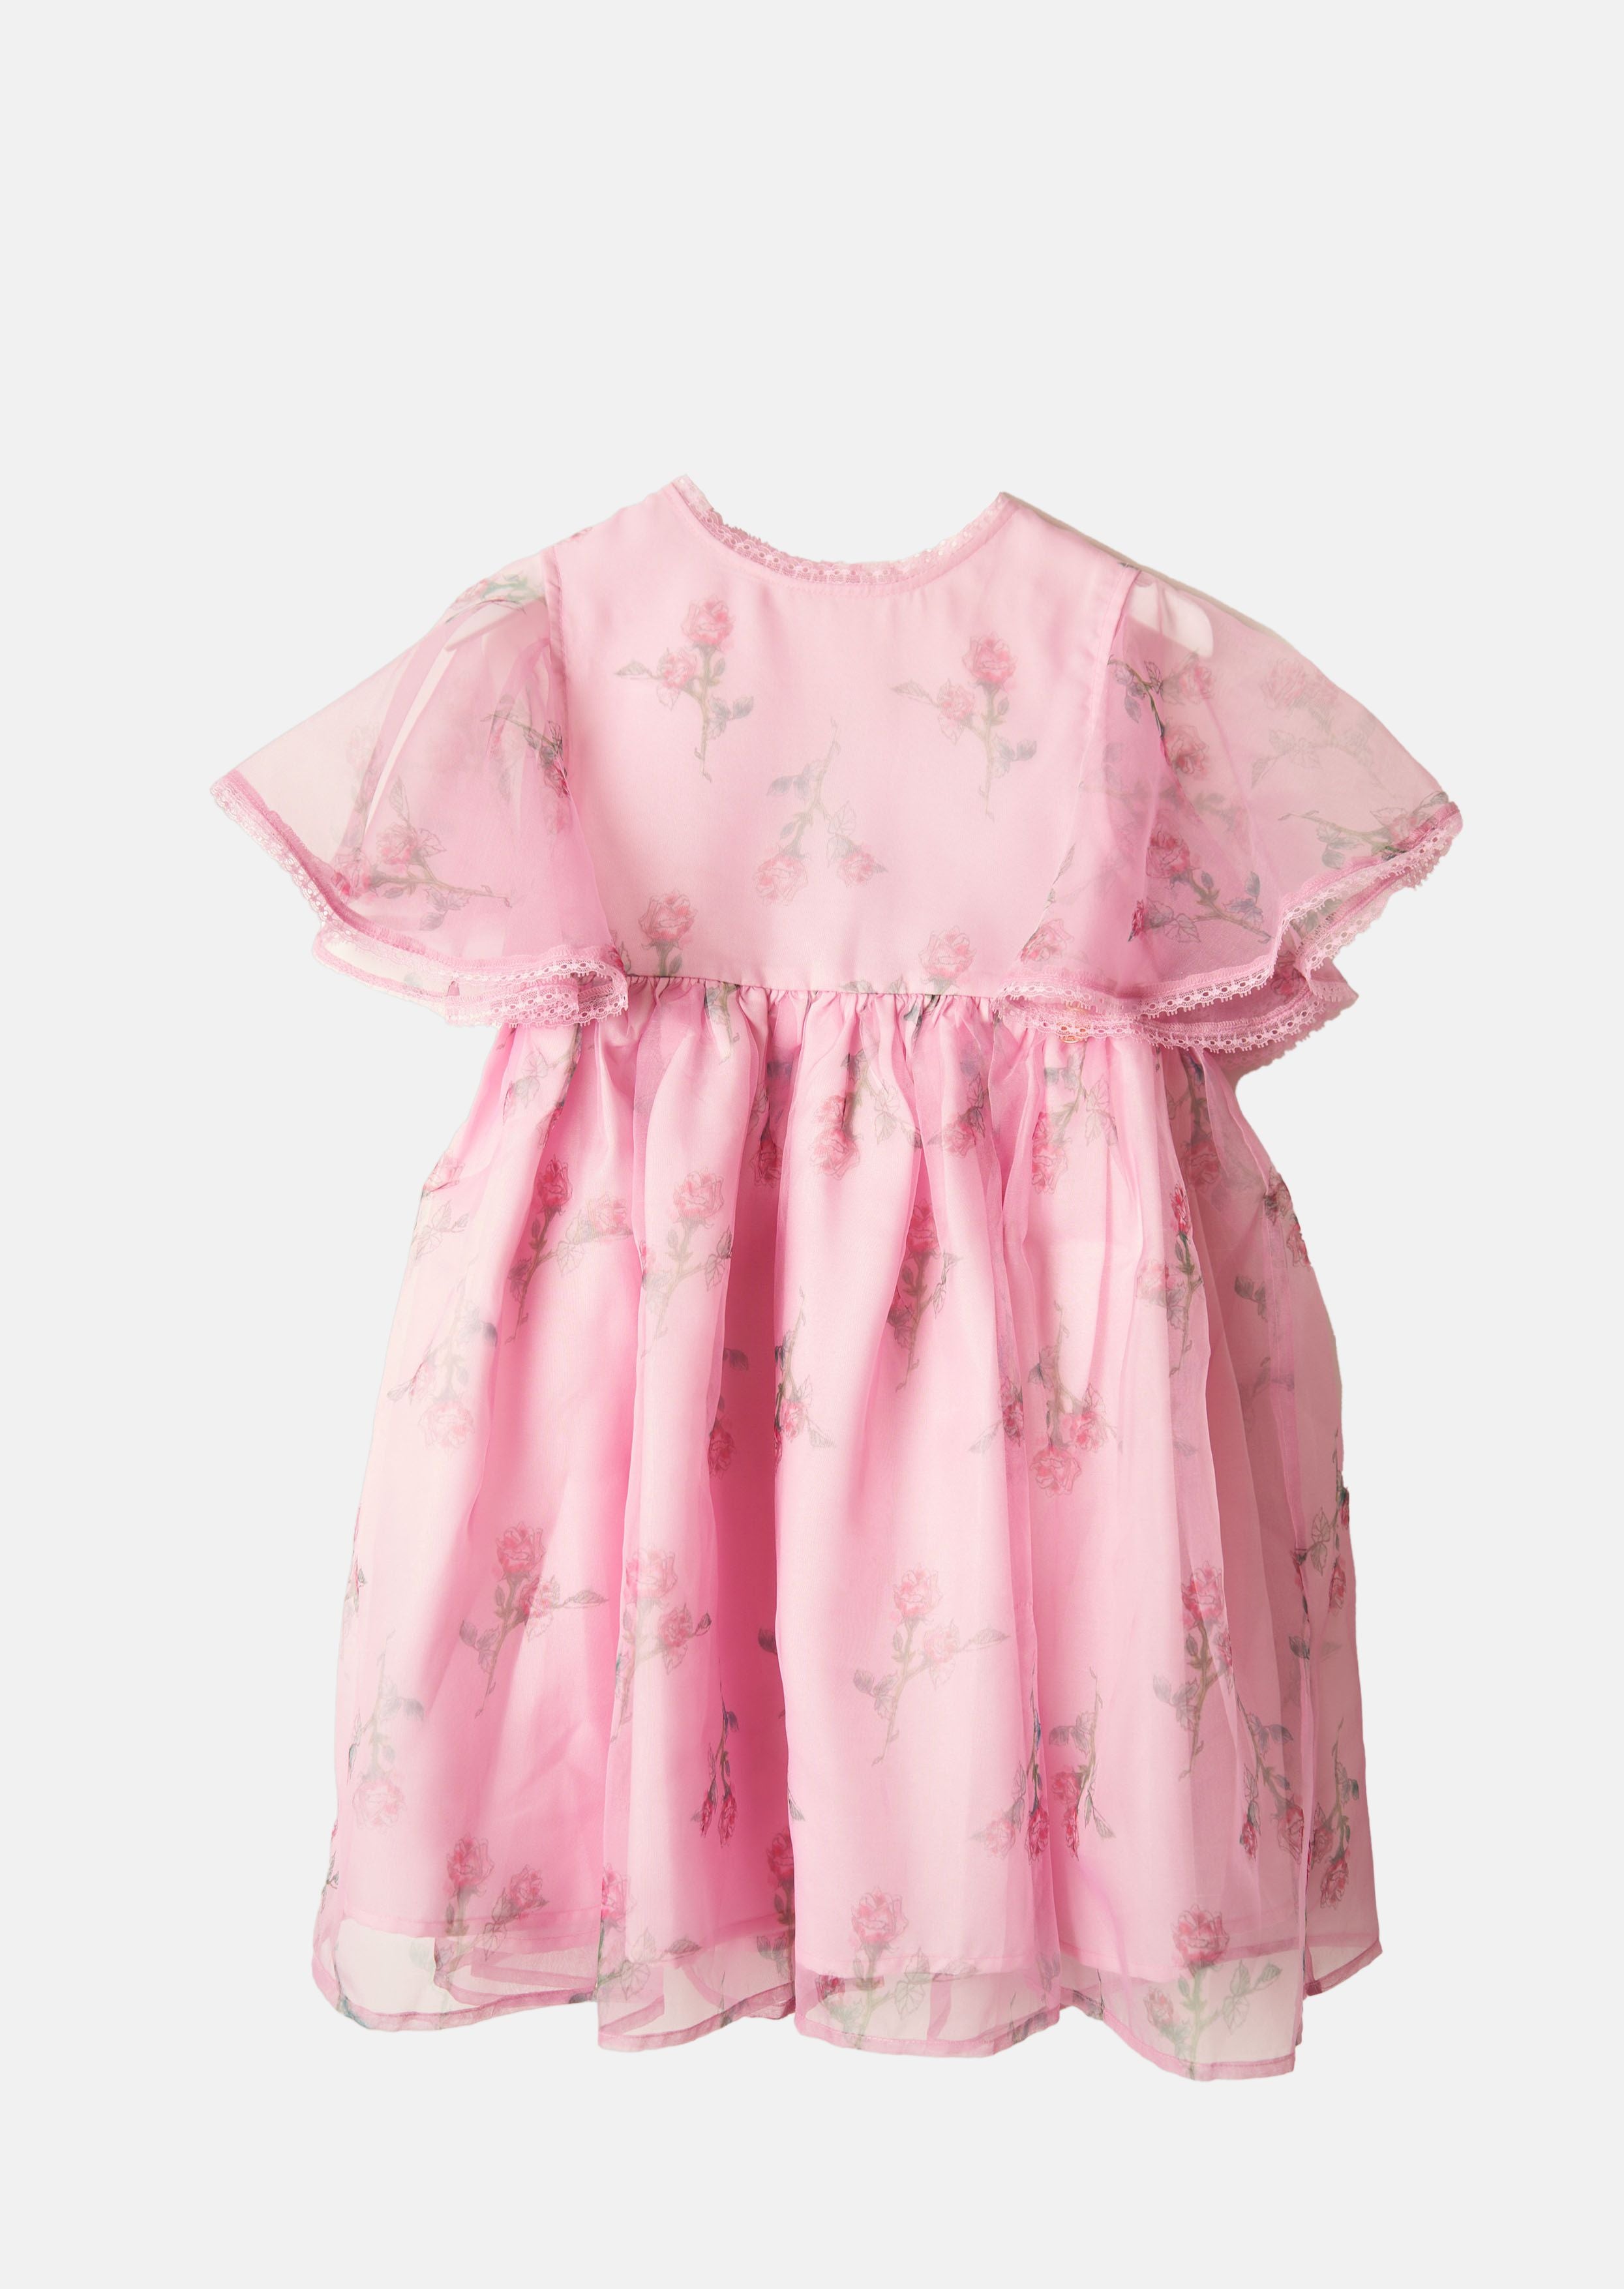 Girls Floral Printed Pink Dress with Cape Sleeves